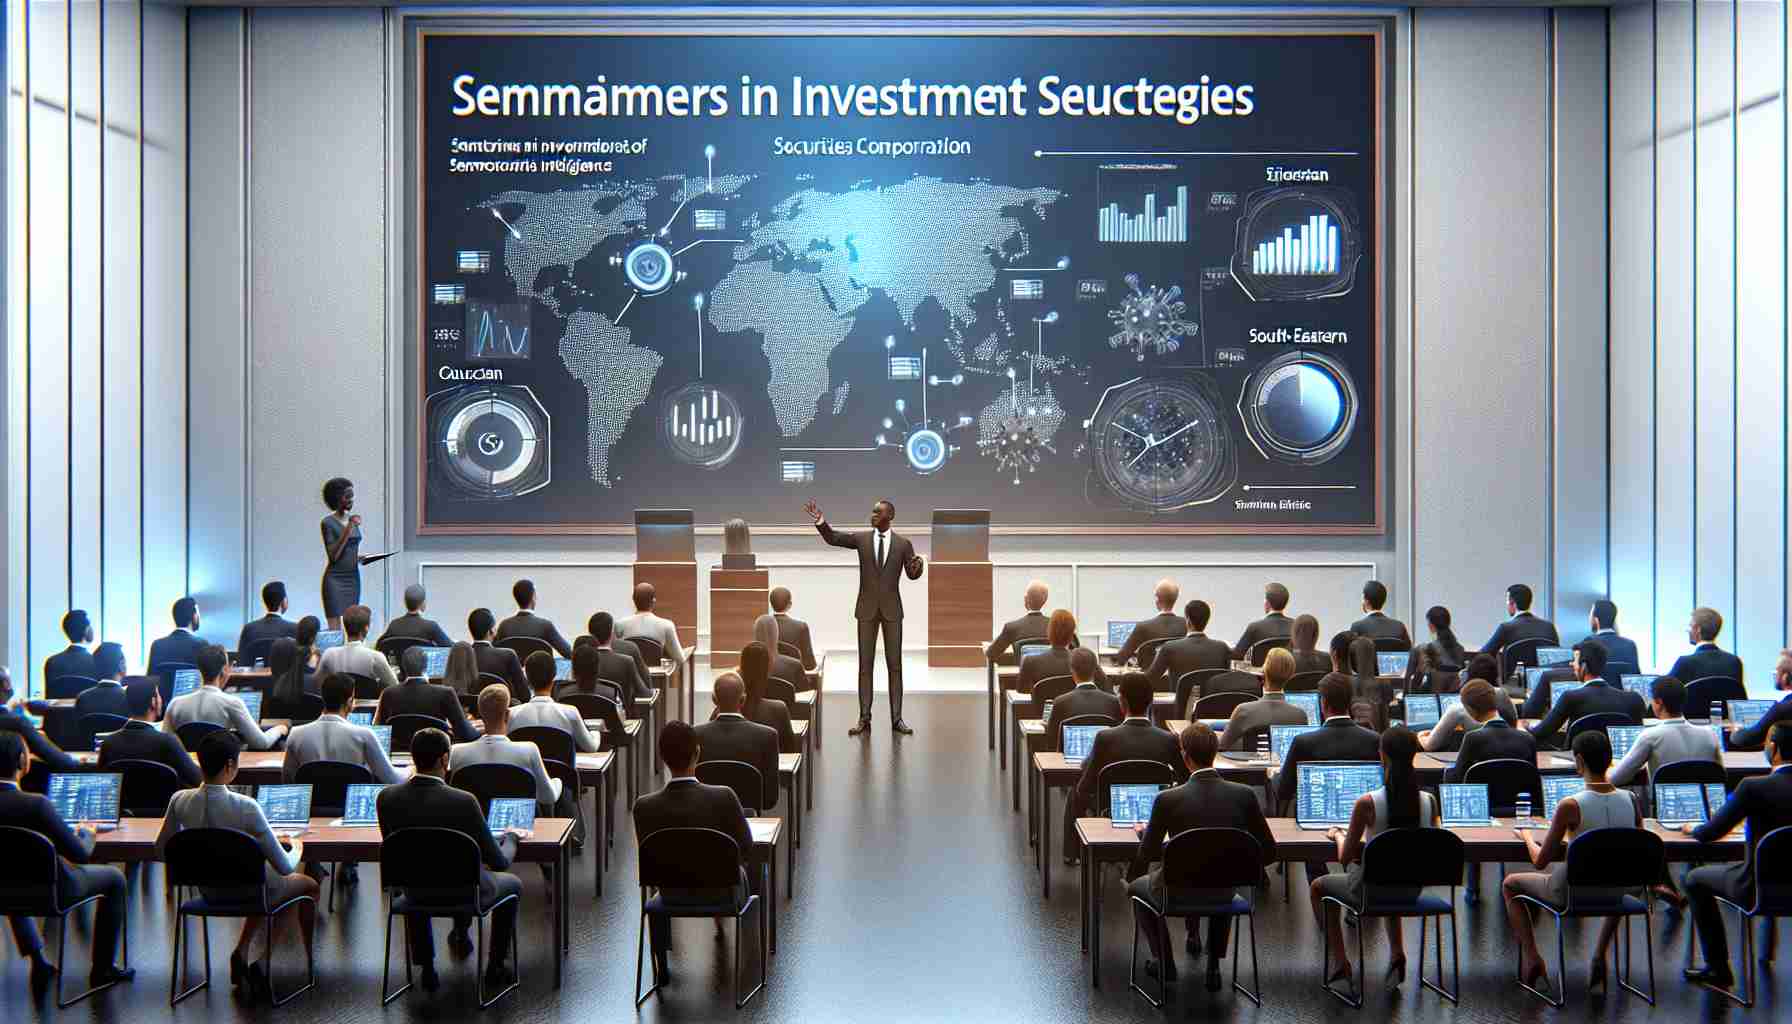 Investment Strategies for Semiconductors and AI: An Insightful Seminar by NH Investment & Securities